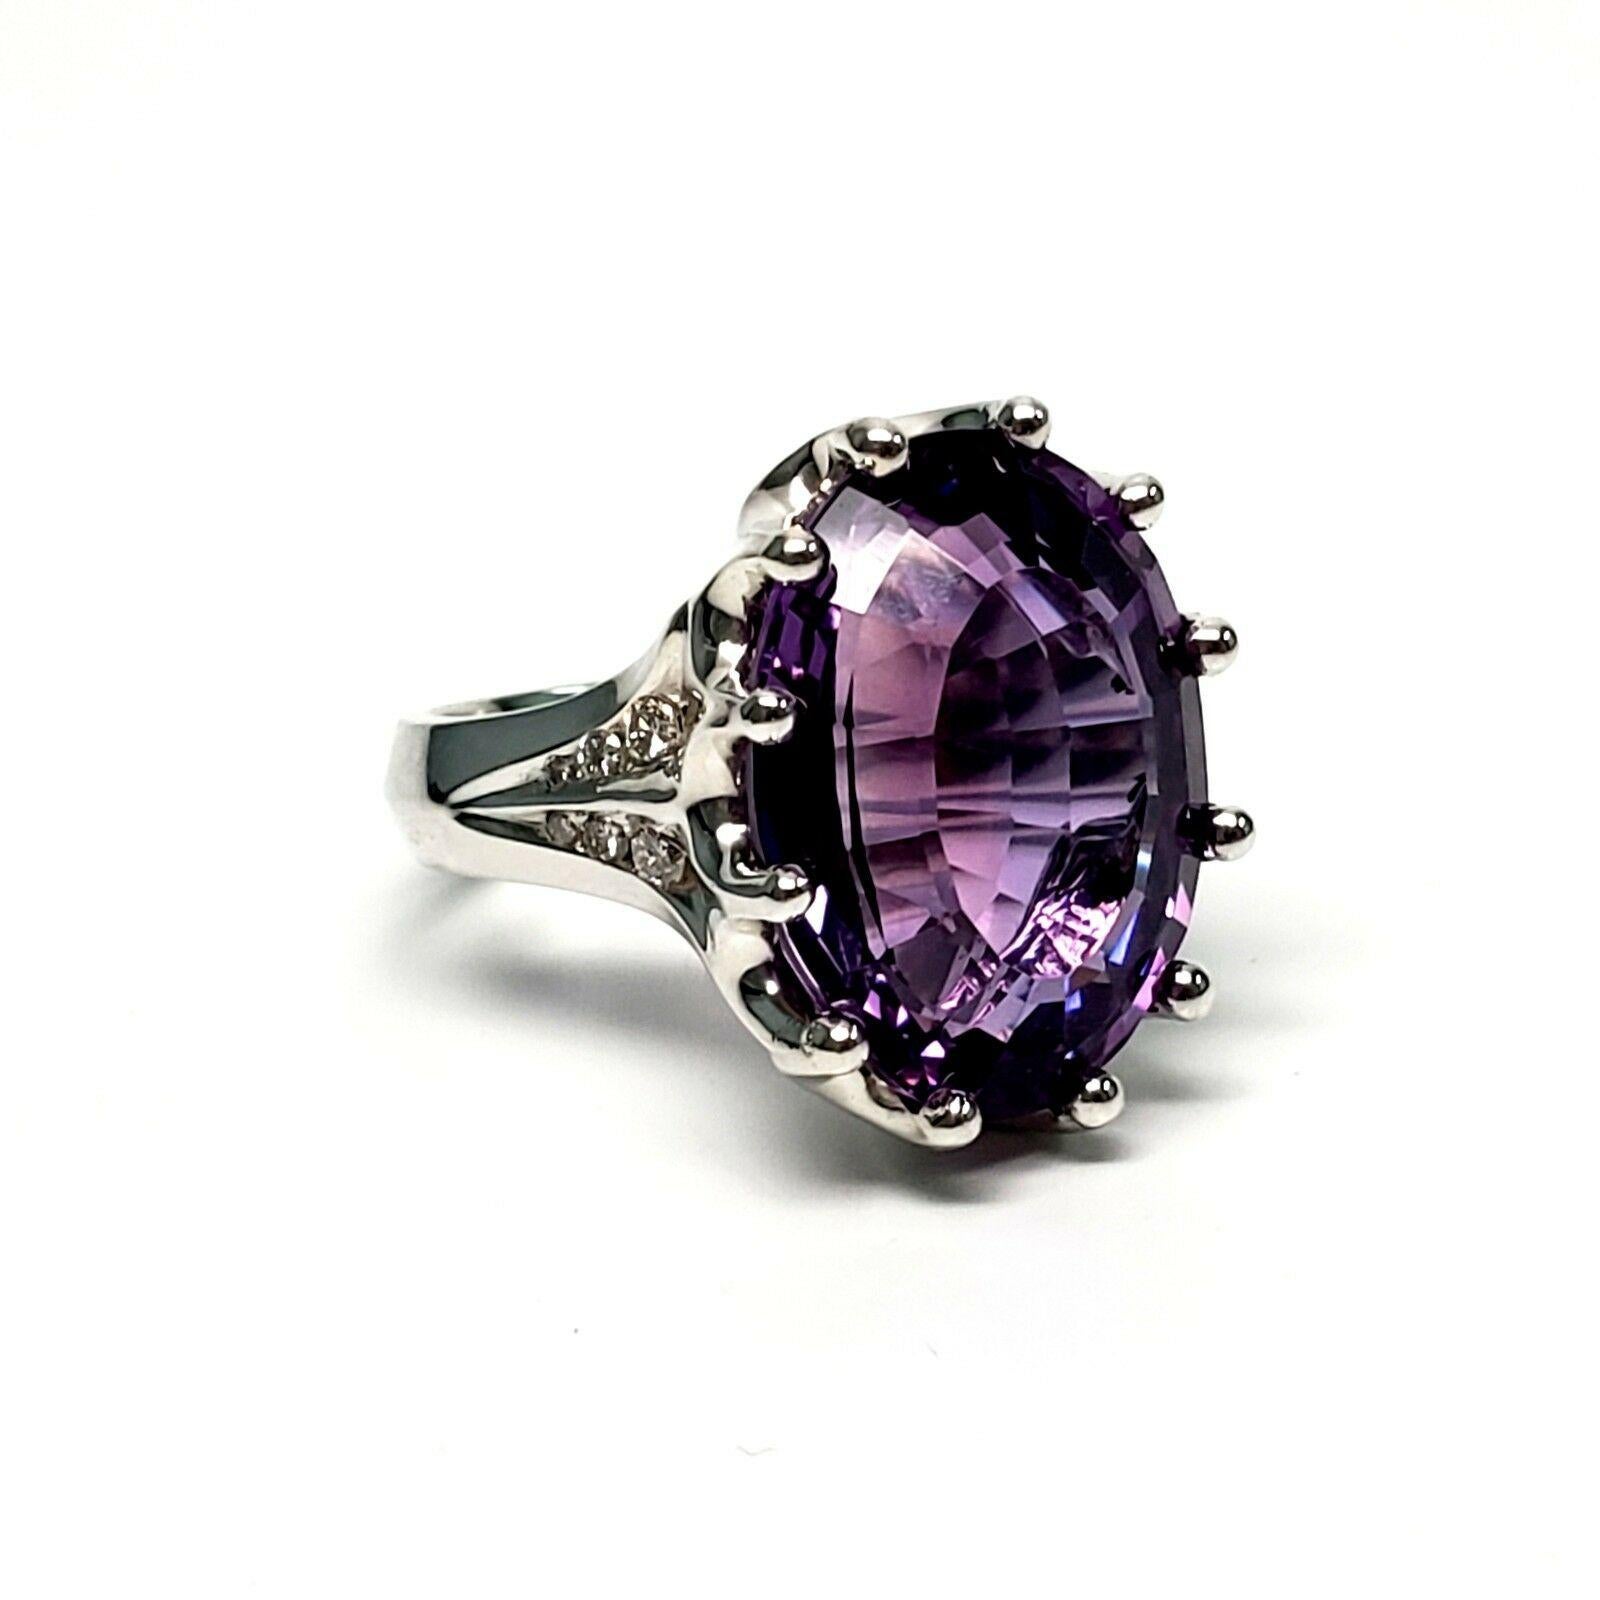 Margot Manhattan Sterling Silver Amethyst and Diamond Ring, size 8.

This is a beautiful sterling silver ring by designer Margo of Manhattan featuring a very large oval shaped faceted amethyst in a prong setting with 6 small round diamonds on each